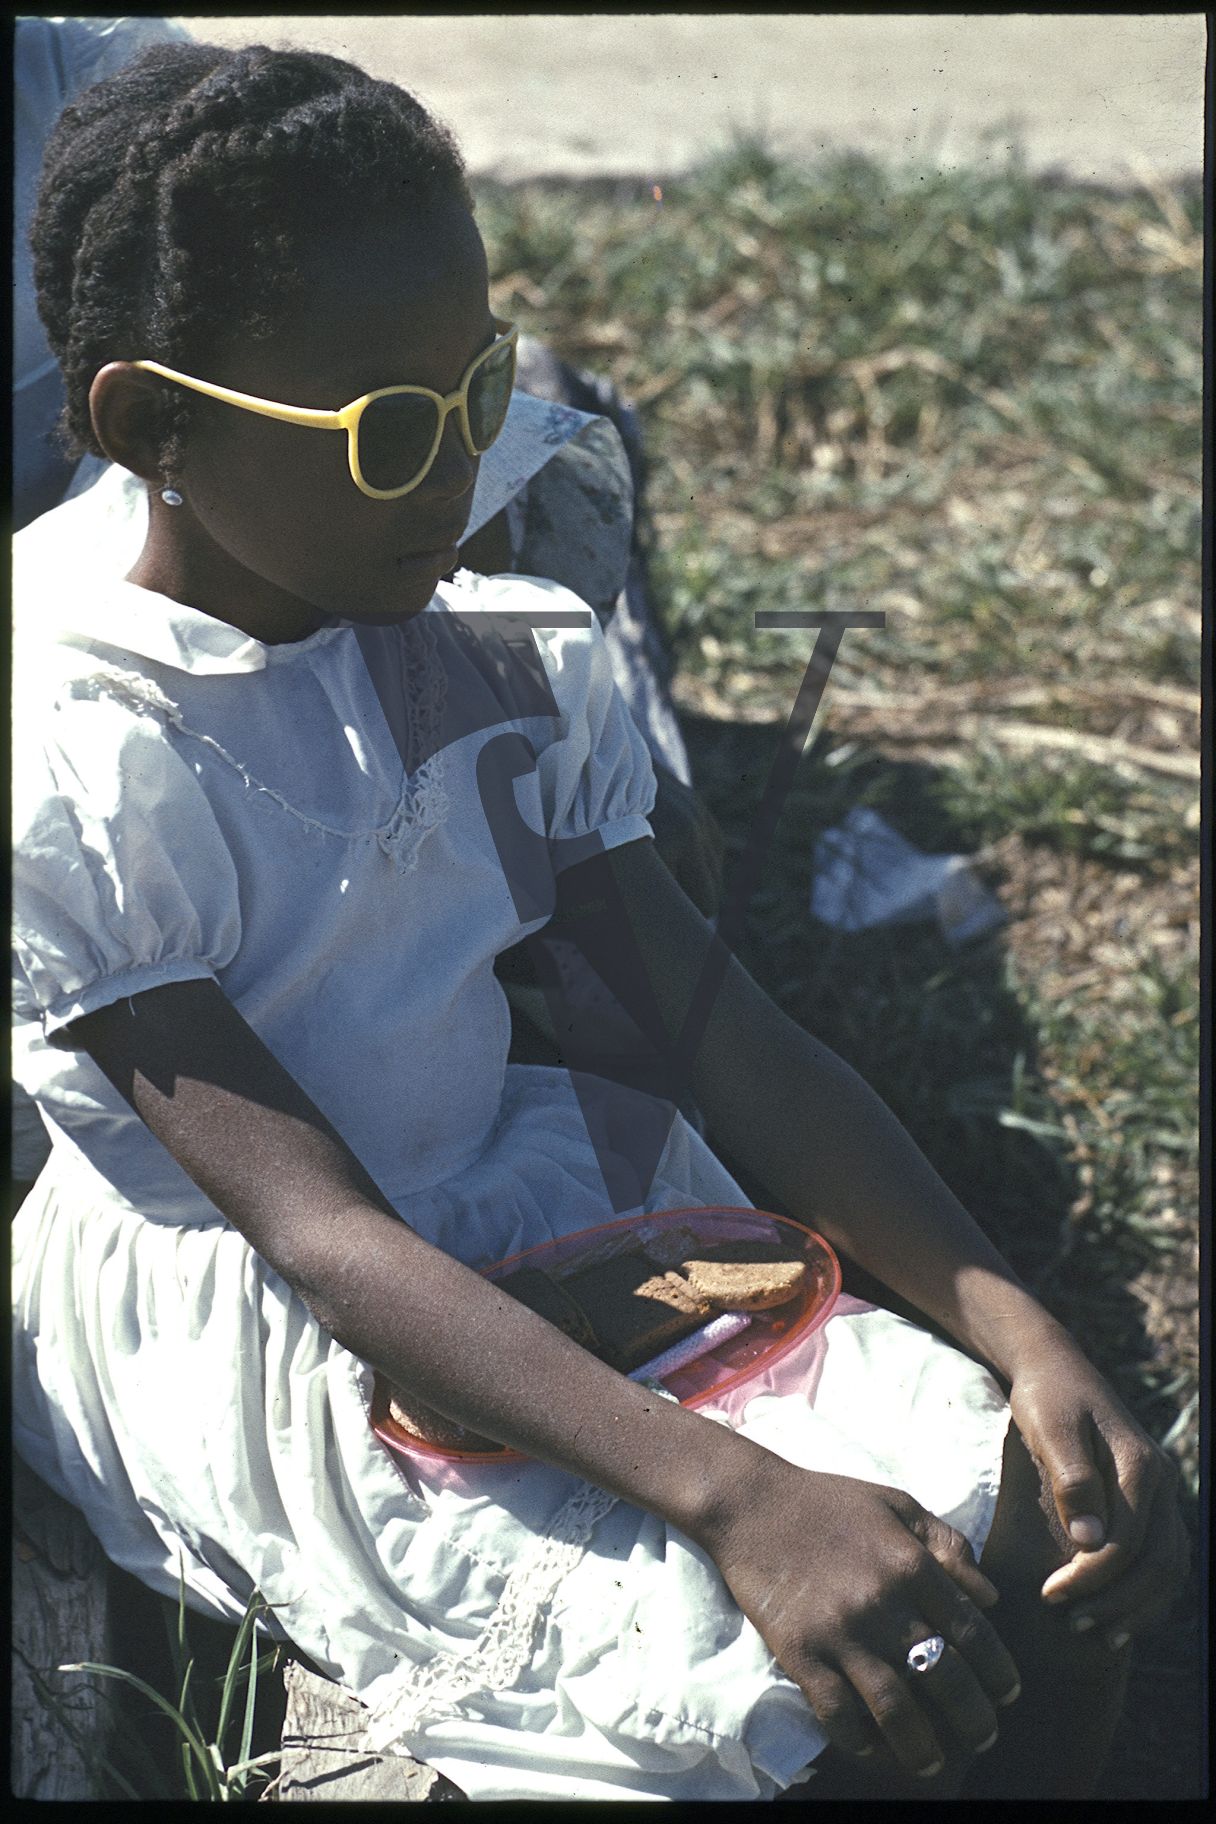 Belize, Girl with sunglasses.